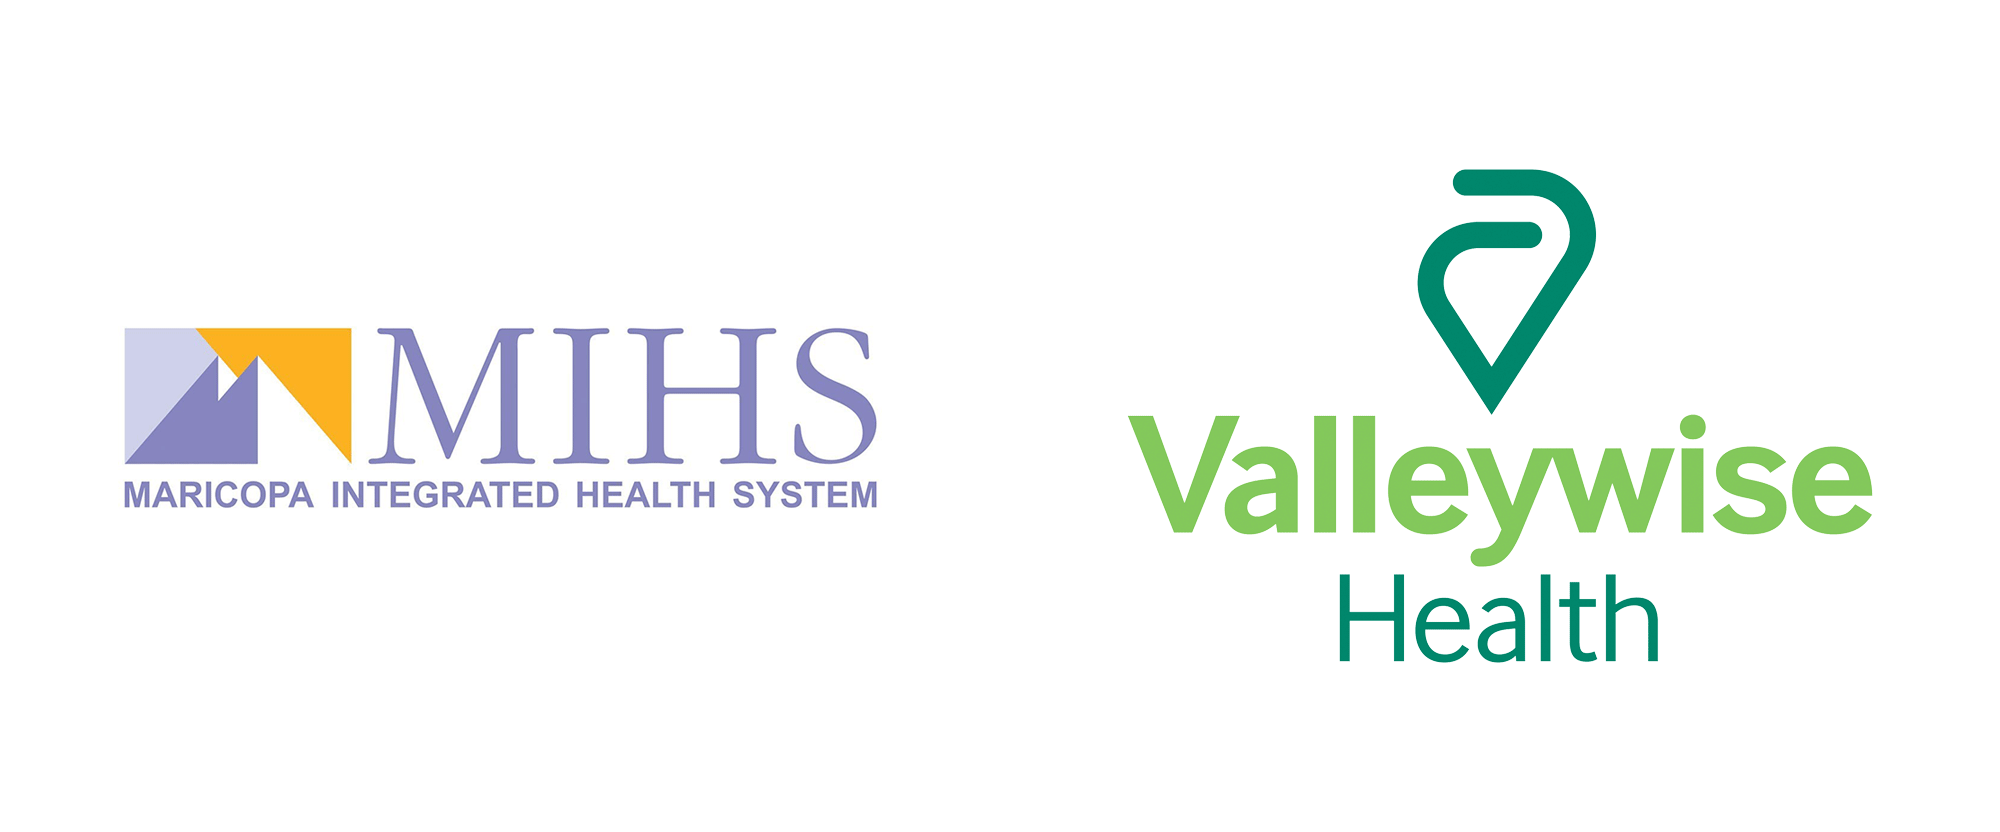 New Logo and Identity for Valleywise Health by Siegel+Gale